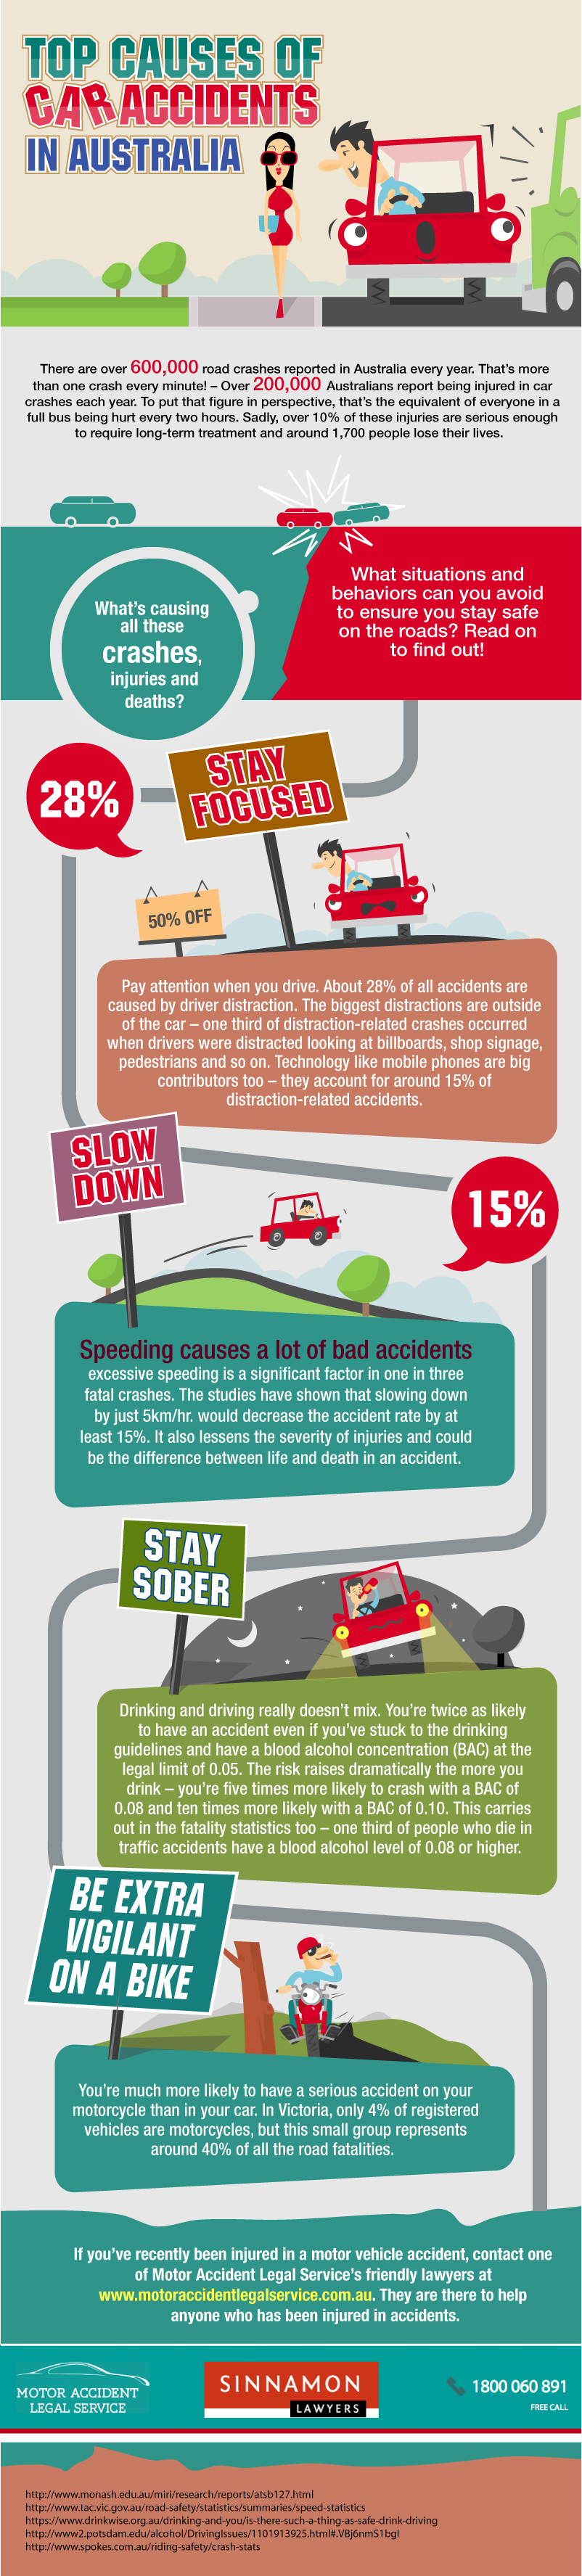 Top Causes of Car Accidents in Australia